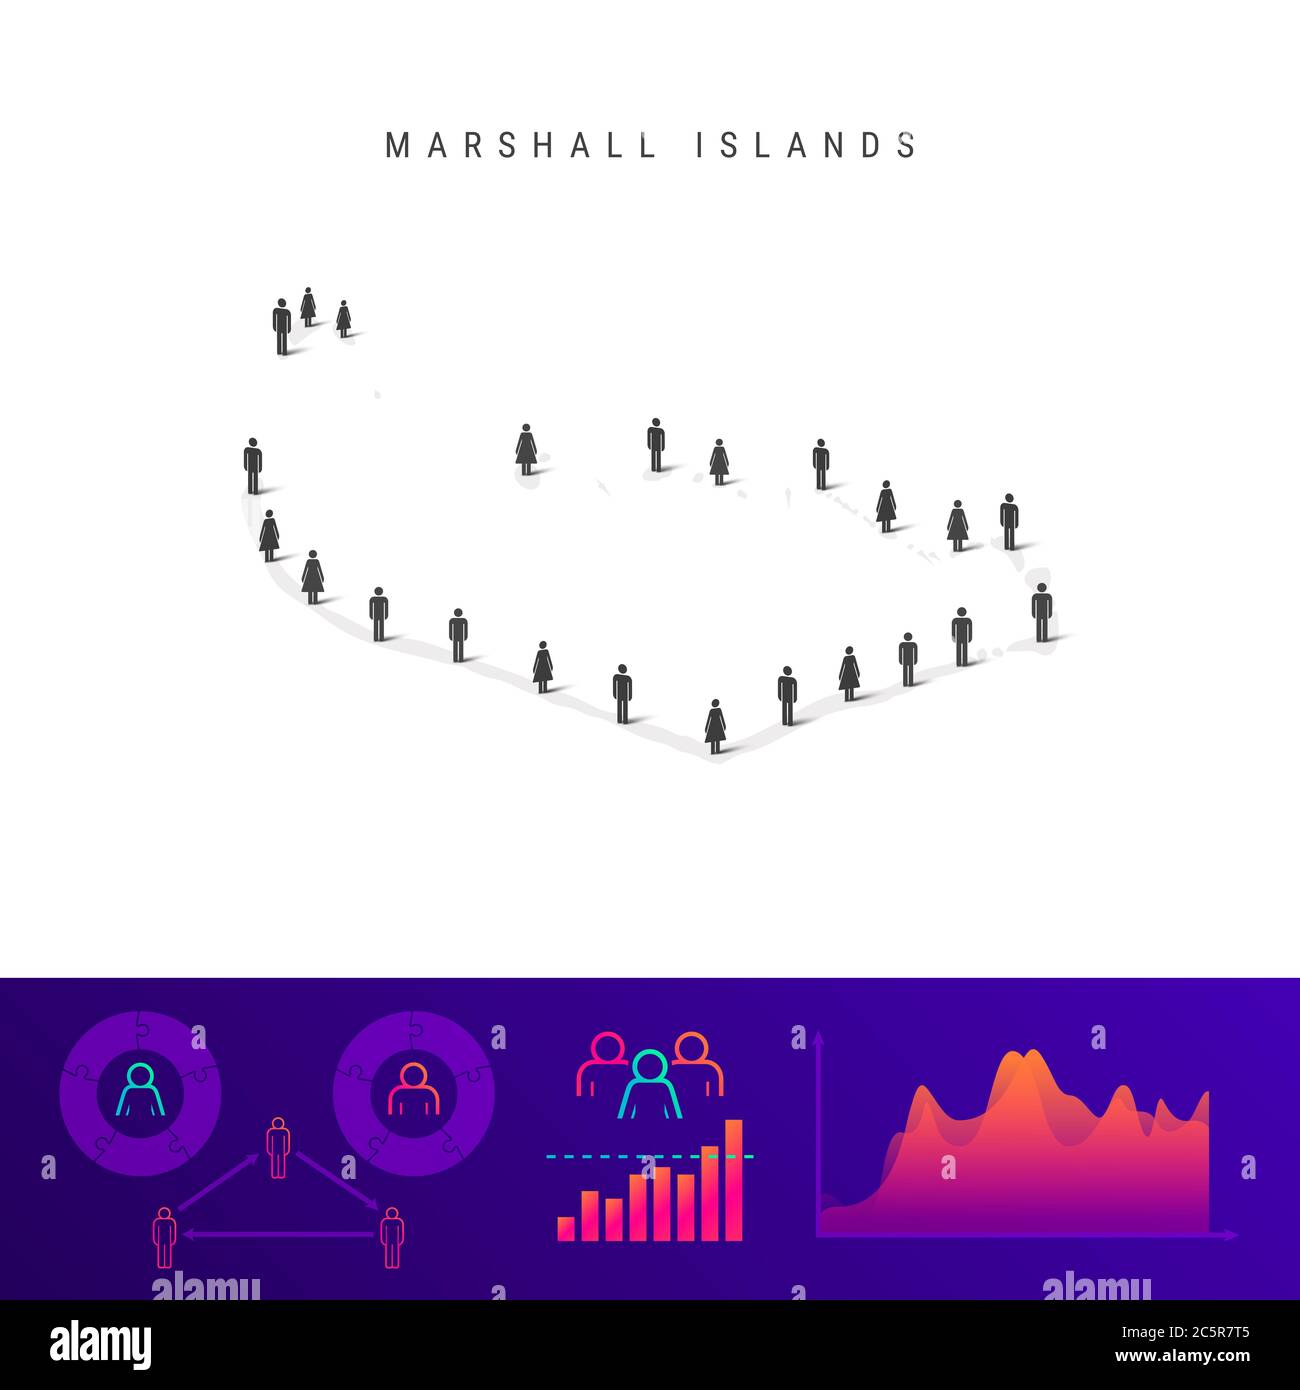 Marshall Islands people map. Detailed silhouette. Mixed crowd of men and women icons. Population infographic elements. illustration isolated on white. Stock Photo